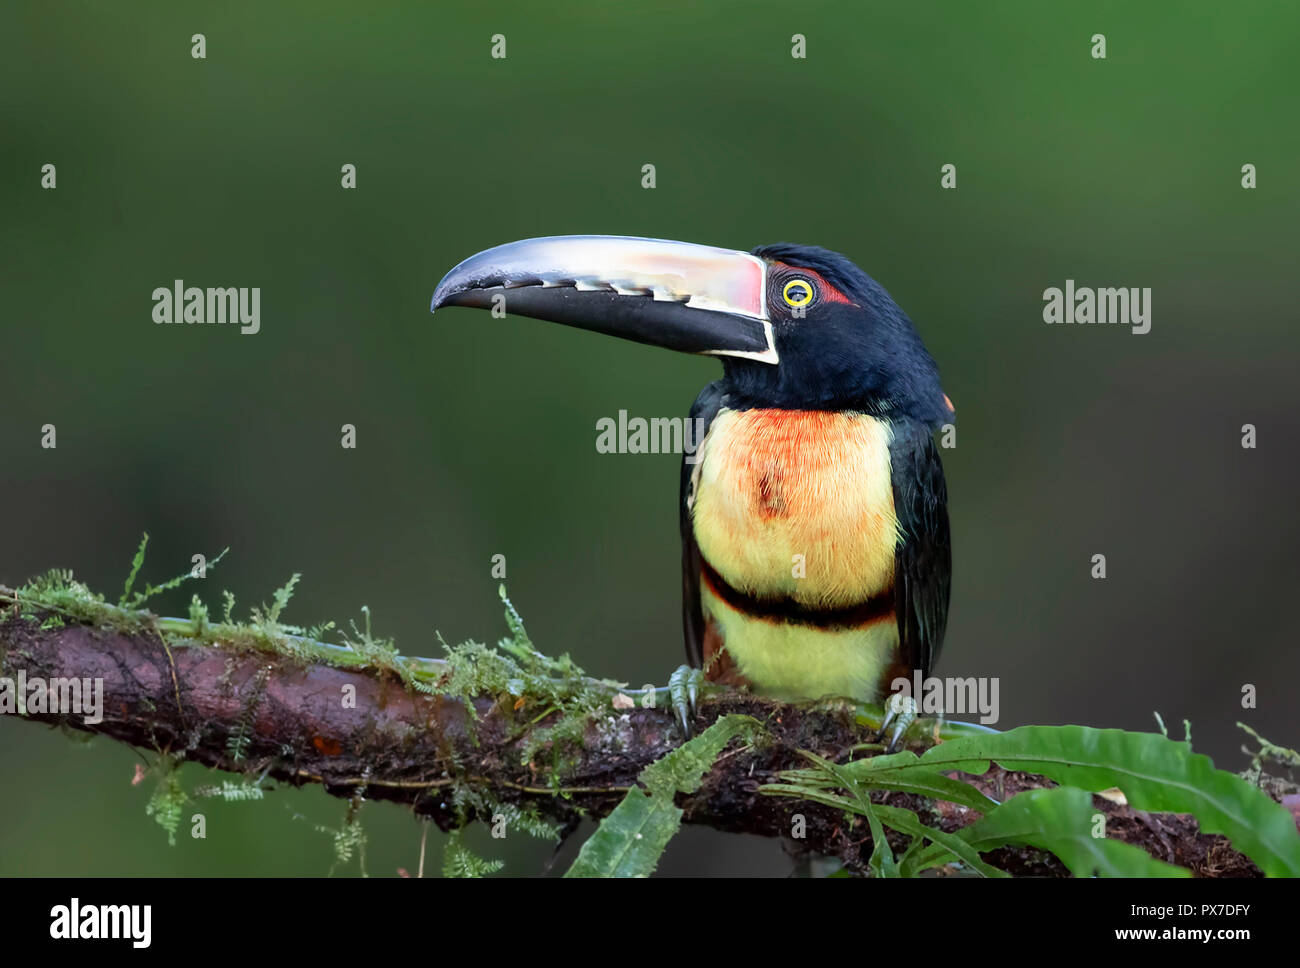 Collared Aracari Toucan (Pteroglossus) perched on a branch in the rainforests of Costa Rica Stock Photo